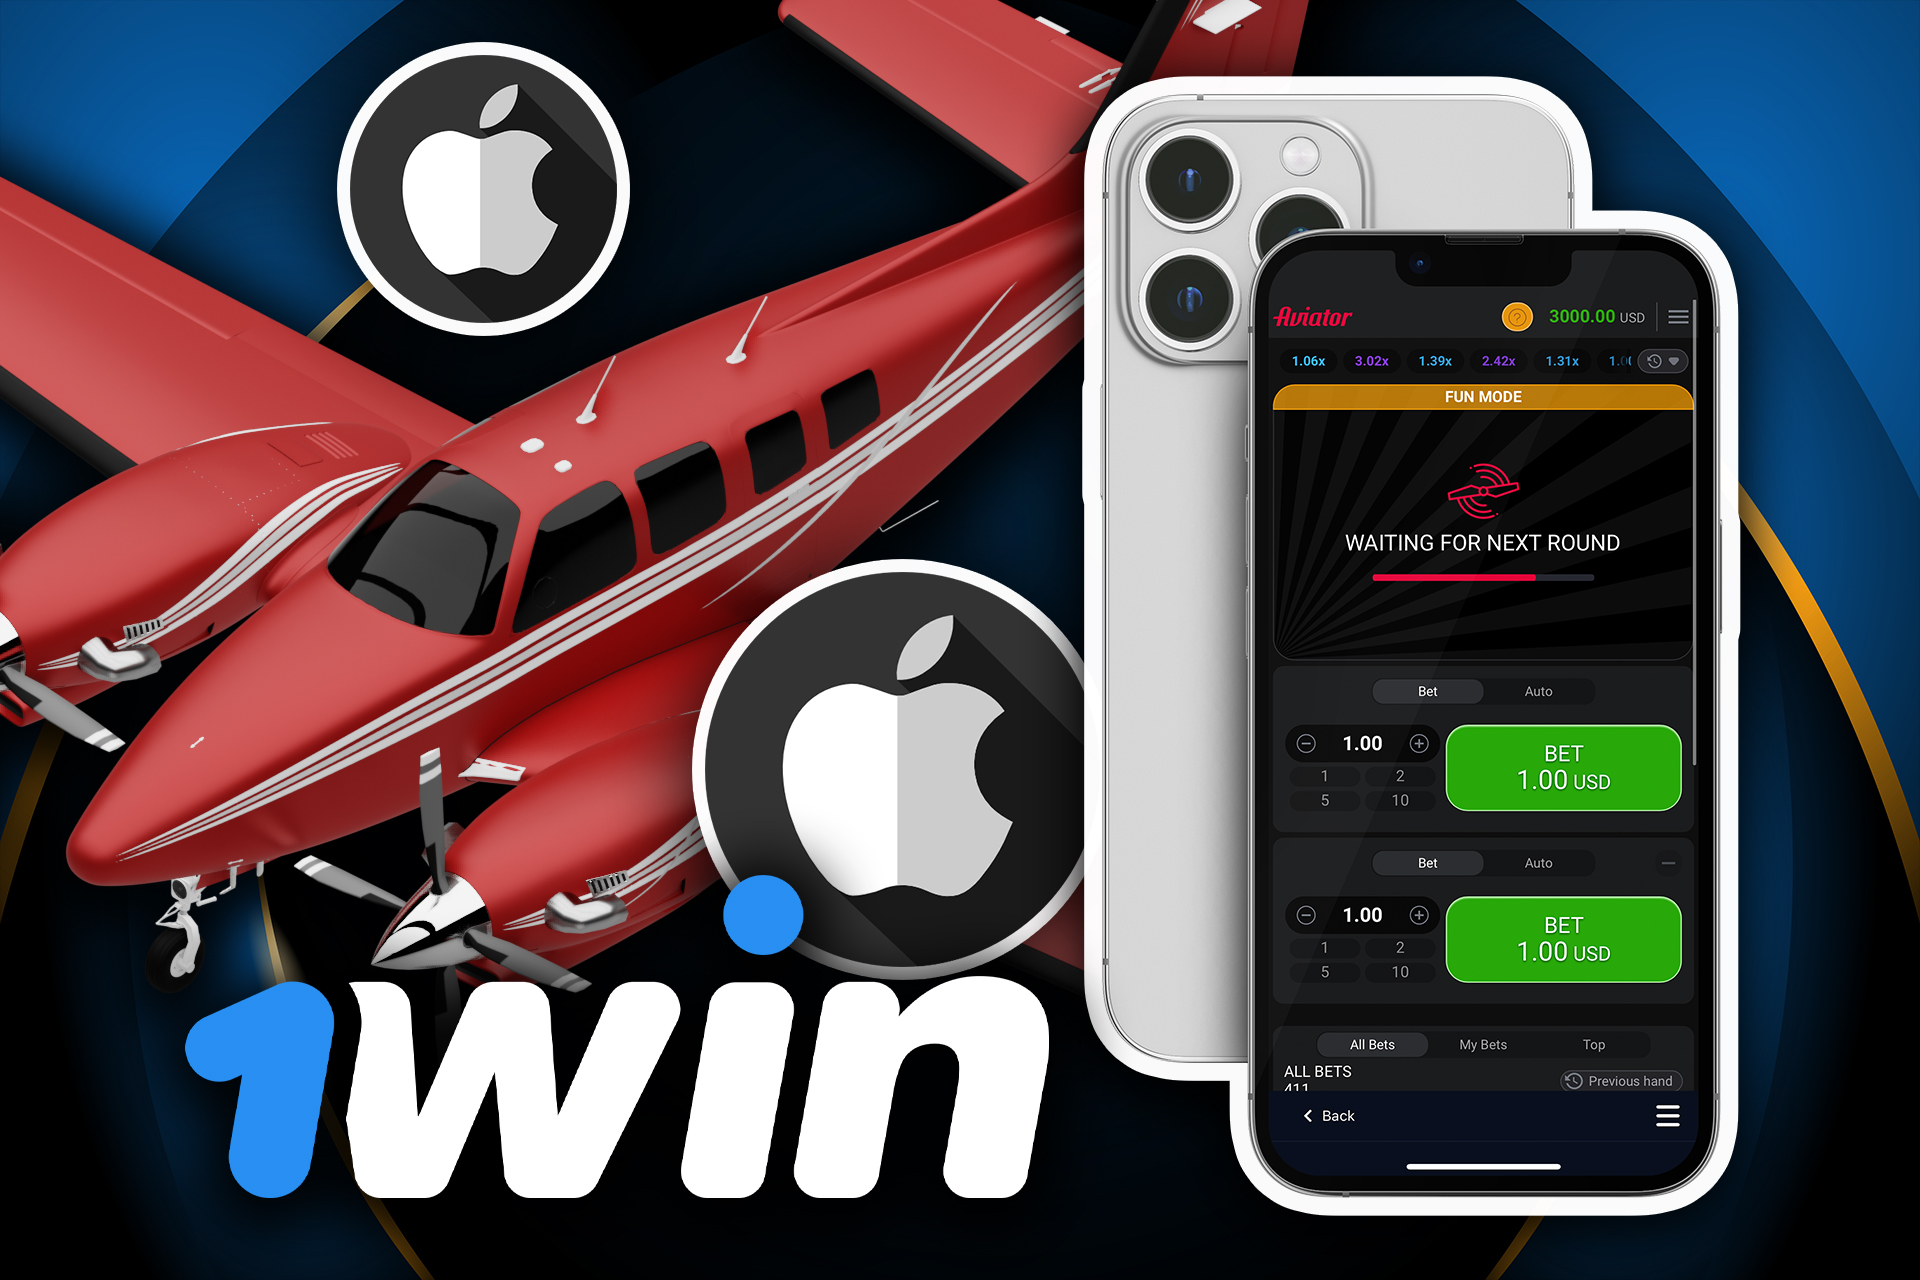 To play Aviator from iPhone, download the iOS app.